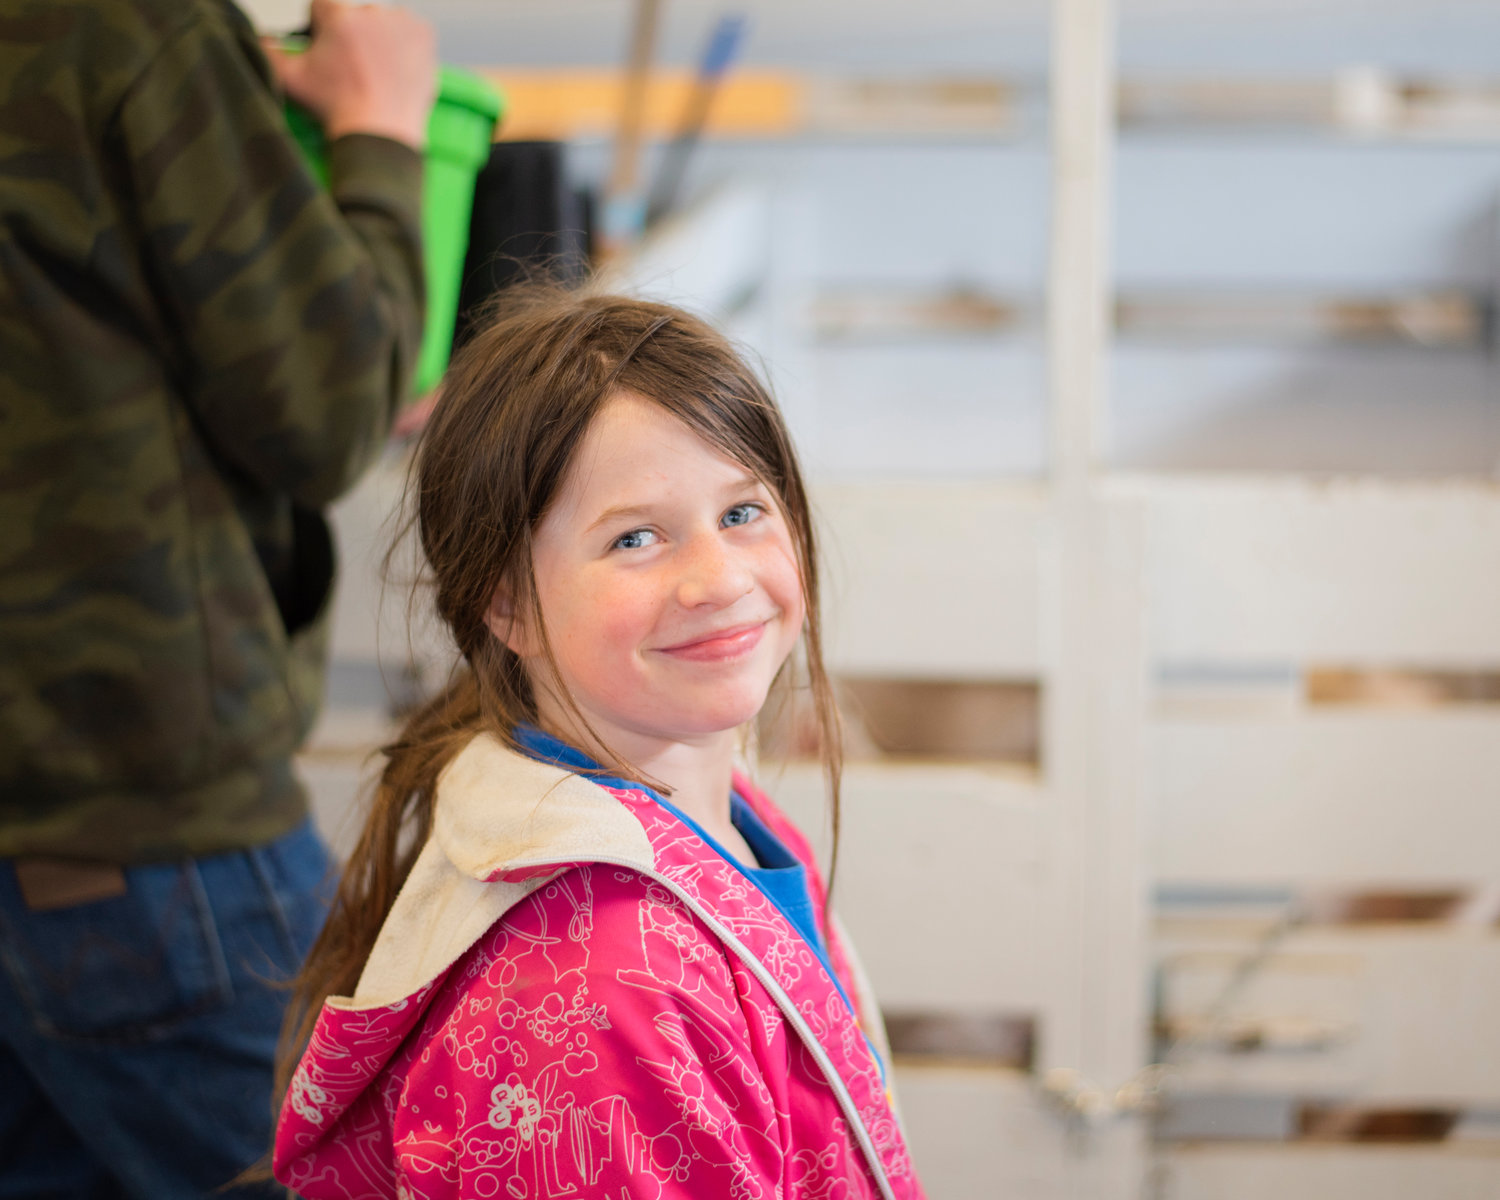 Helen Knabel, 8, smiles while talking about her pig Strawberry at the Southwest Washington Fairgrounds during the Spring Youth Fair on Friday in Centralia.